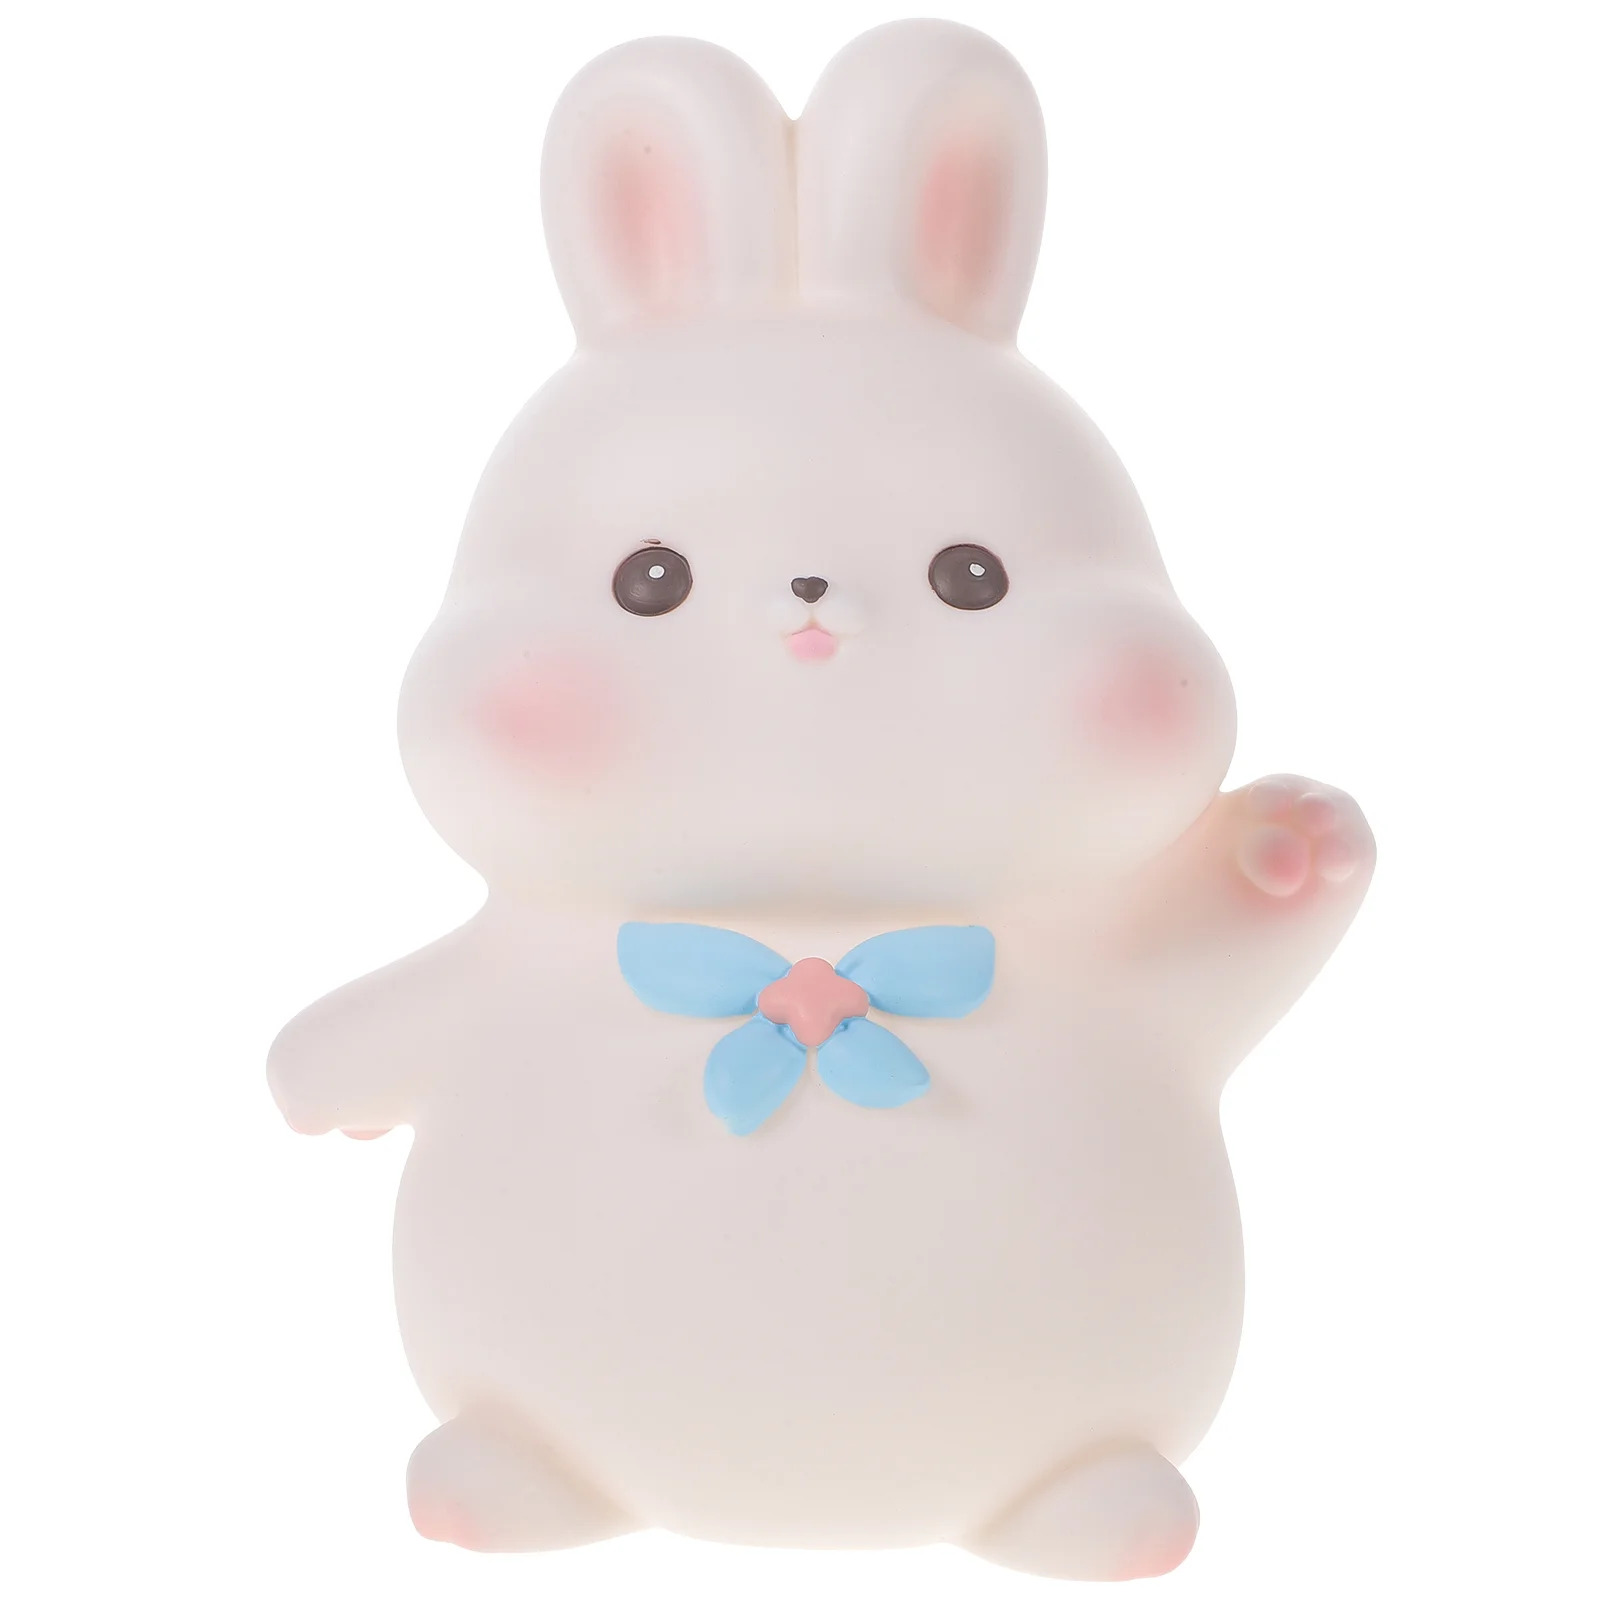 

Bank Piggy Money Saving Bunny Rabbit Easter Animal Coin Banks Box Pot Kids Toys Novelty Container Figurine Figurines Accessory